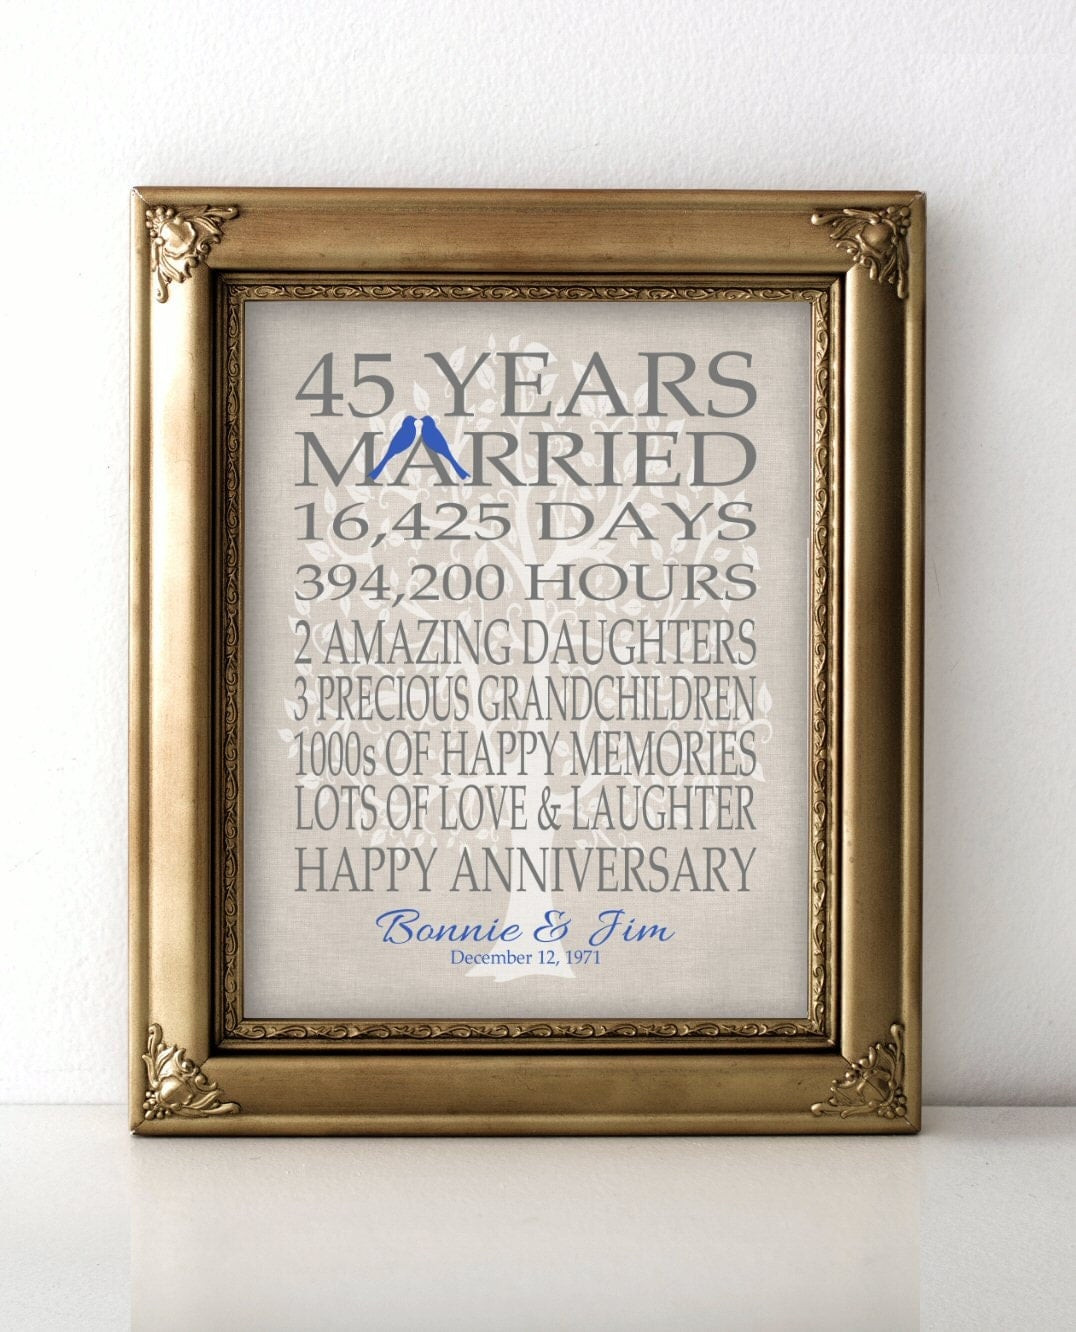 45Th Wedding Anniversary Gift Ideas
 Download 45Th Wedding Anniversary Gift Ideas